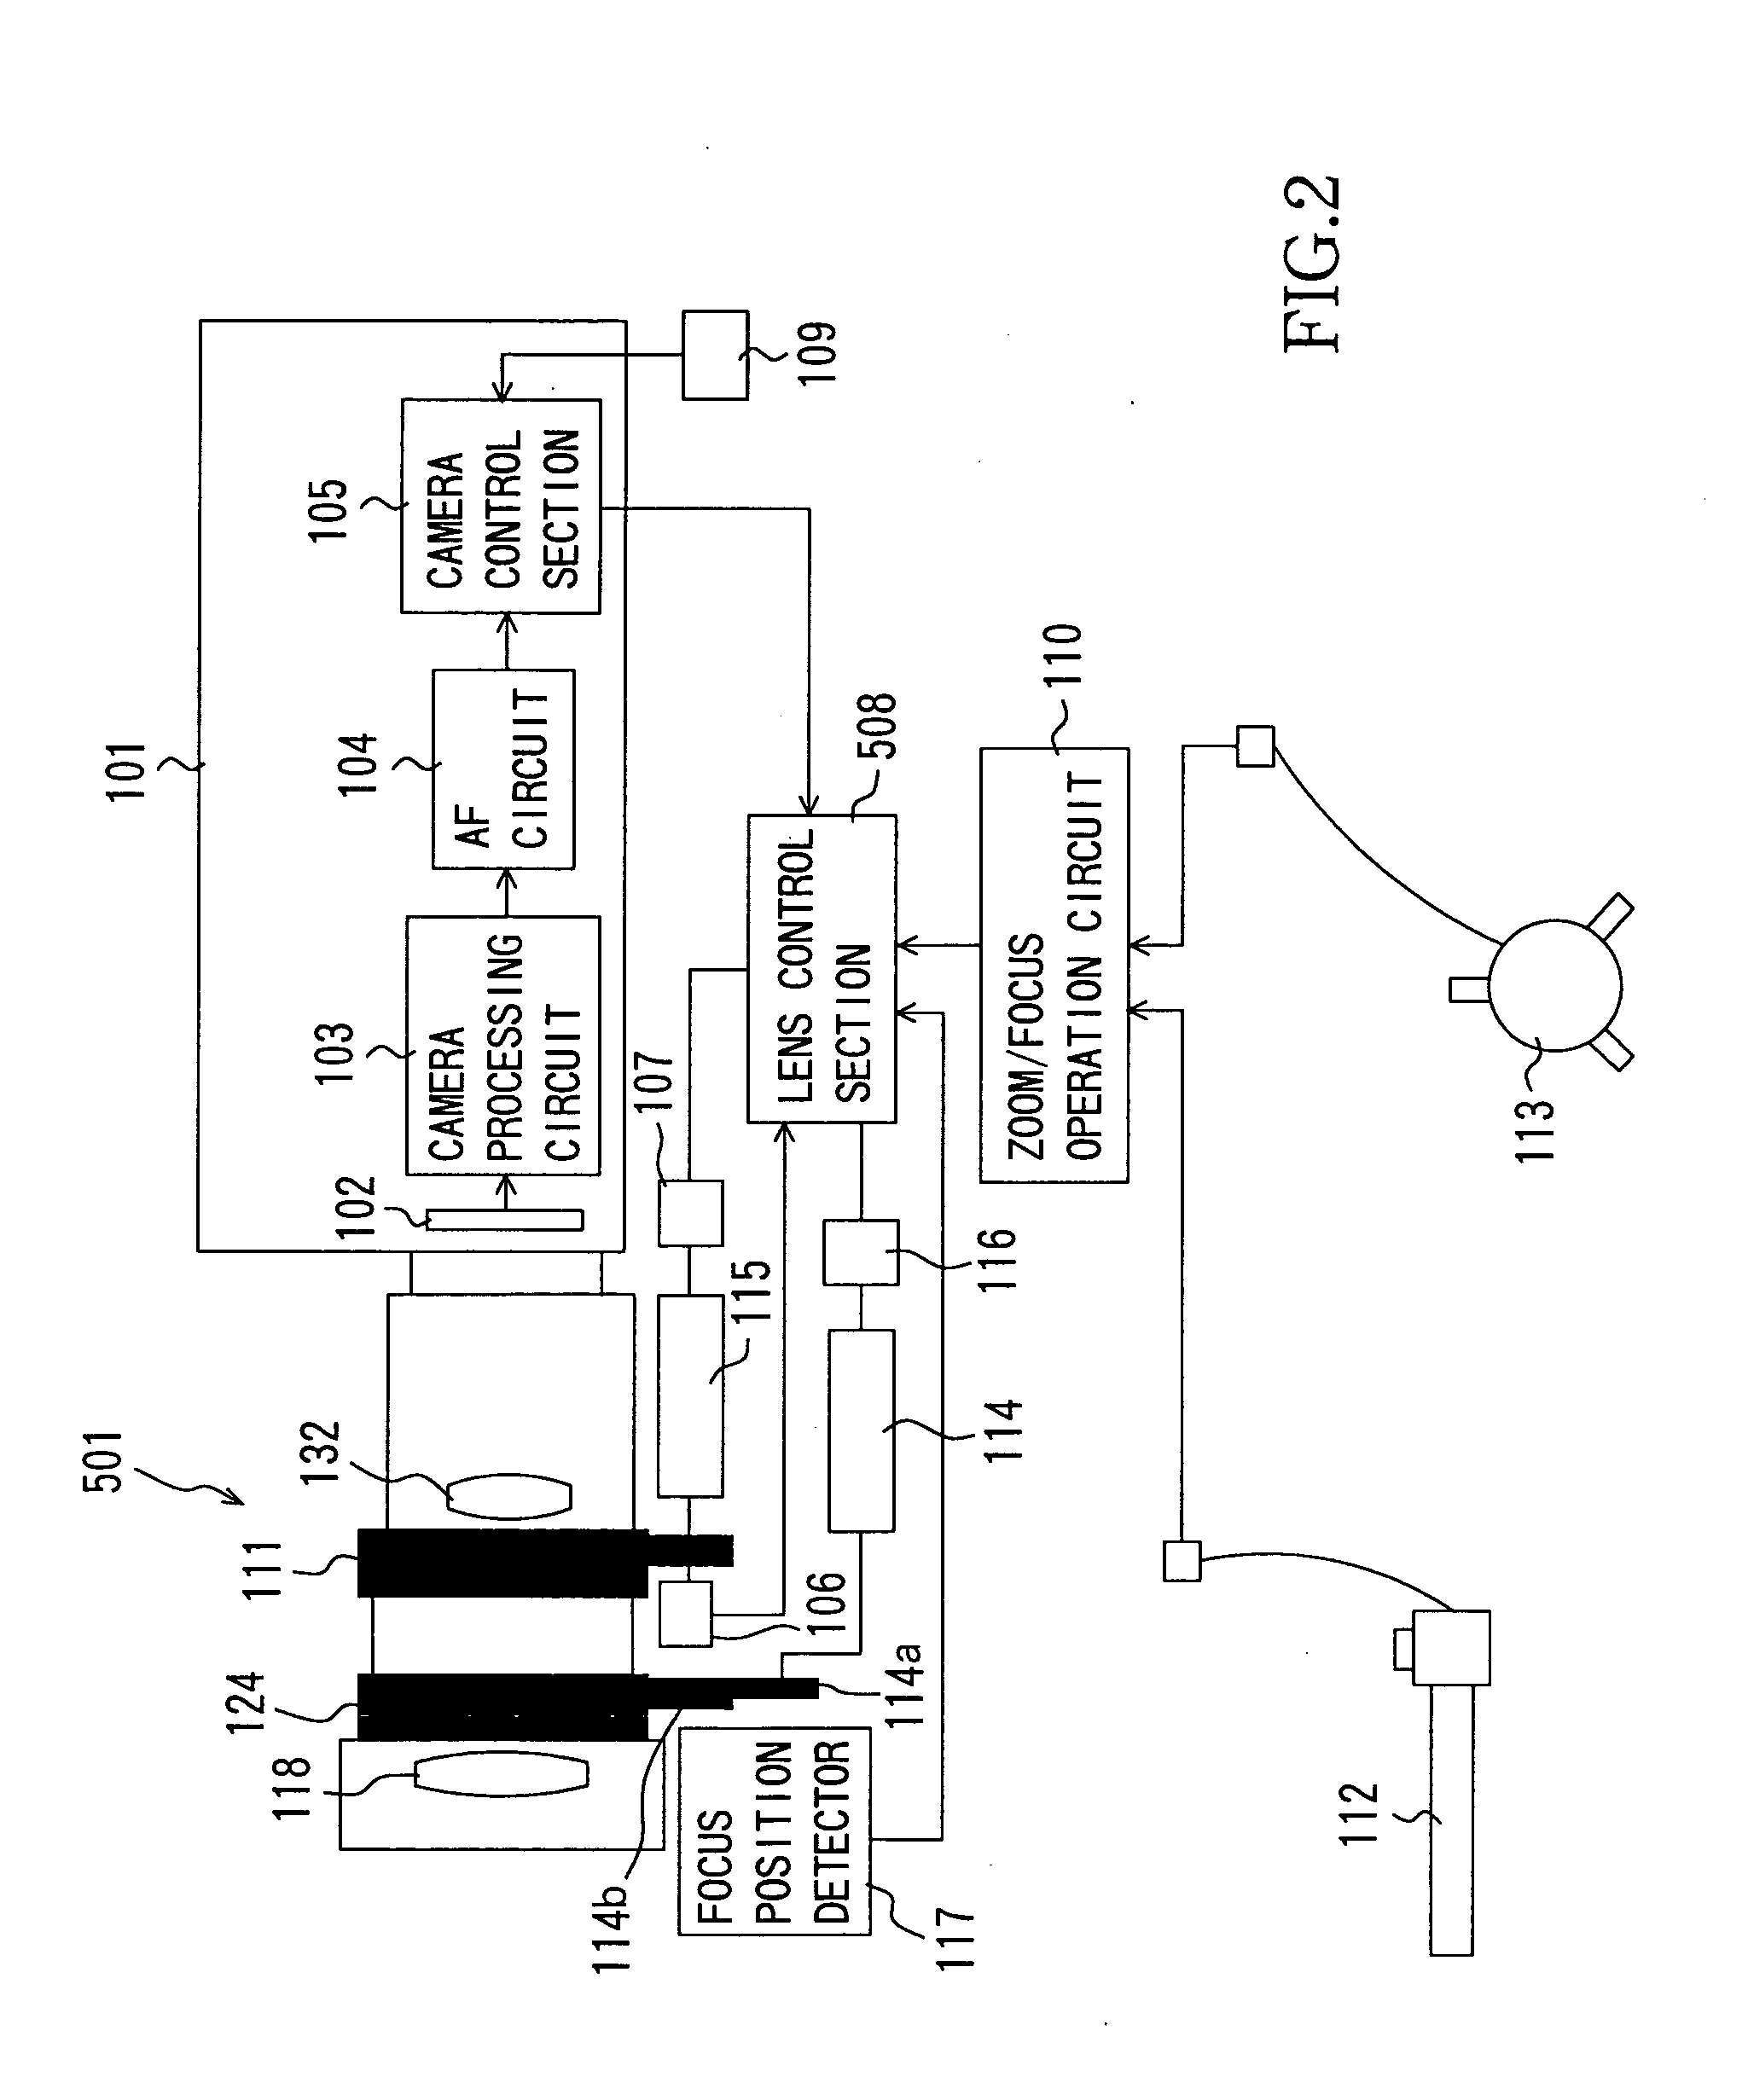 Camera system and lens apparatus